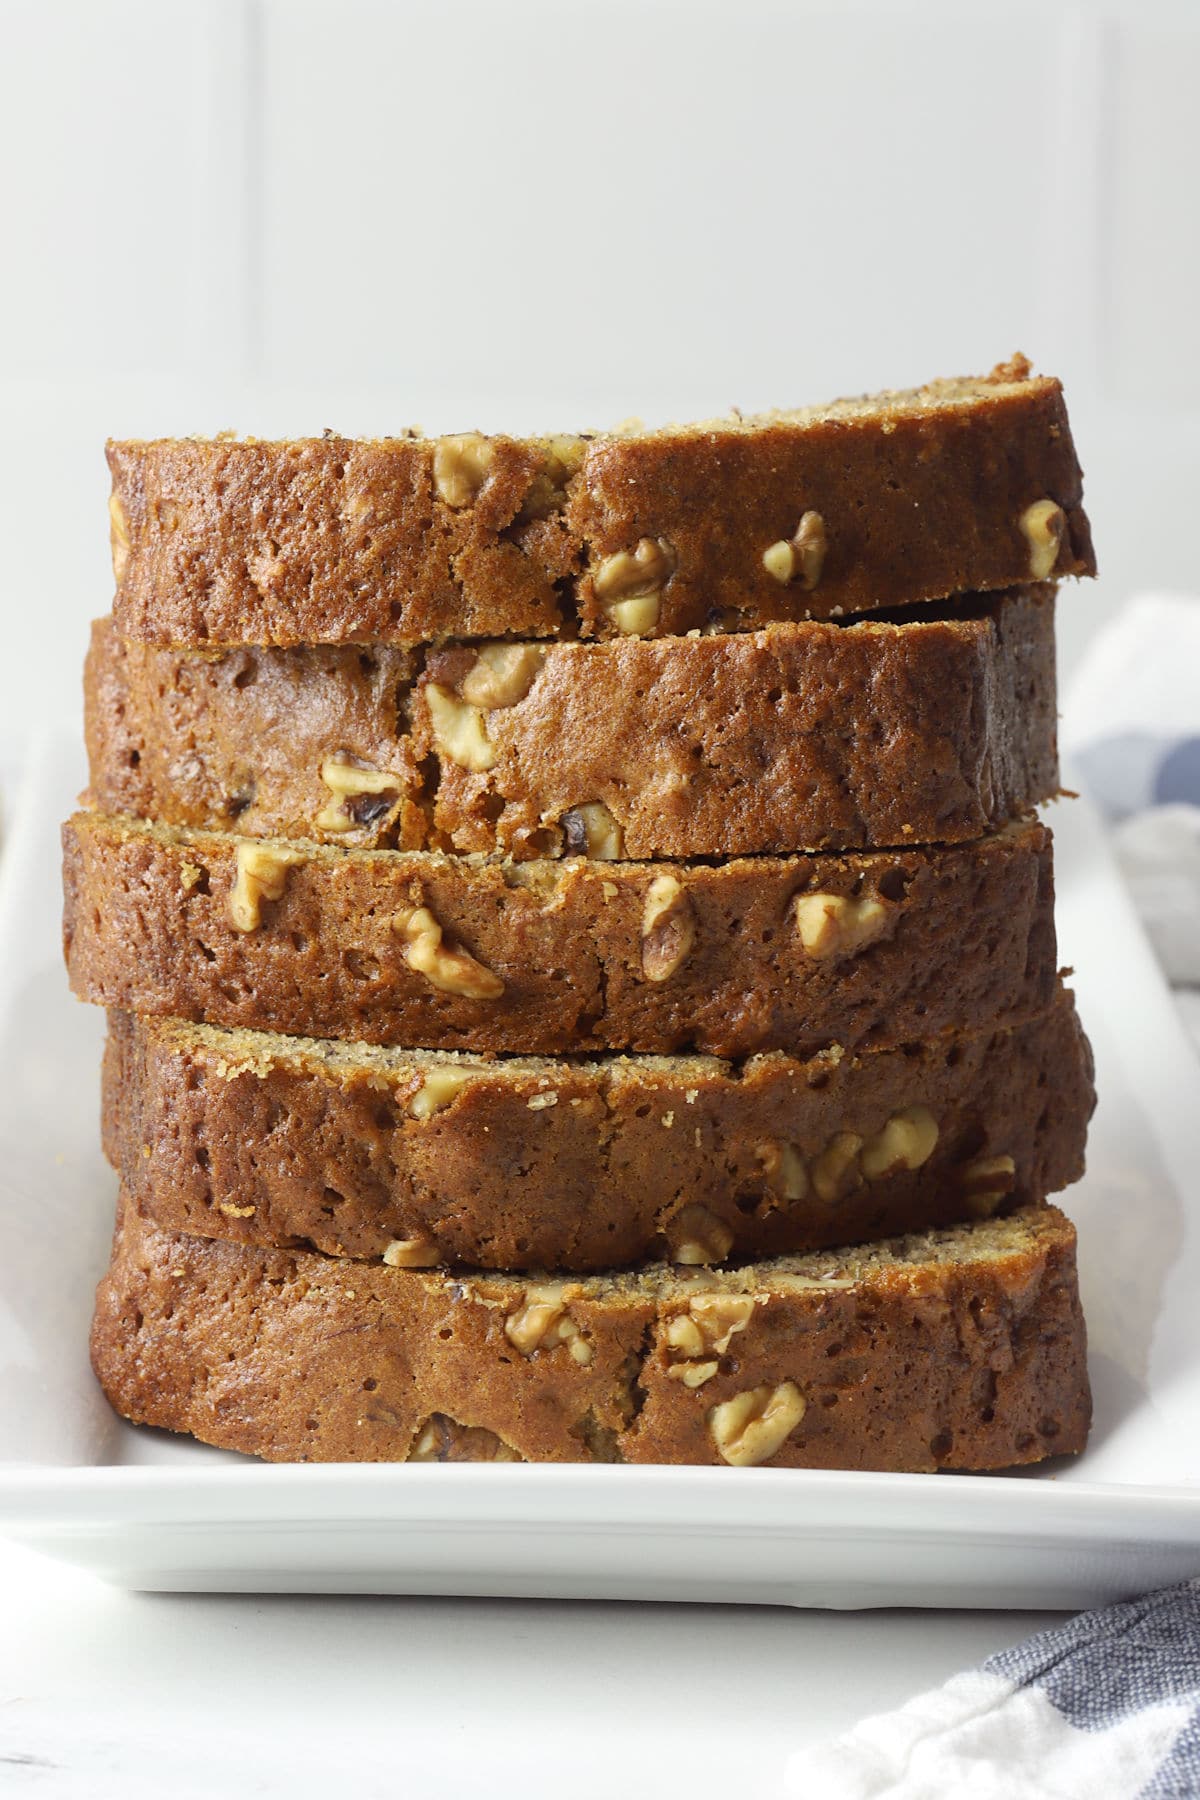 A stack of banana nut bread slices on a white plate.